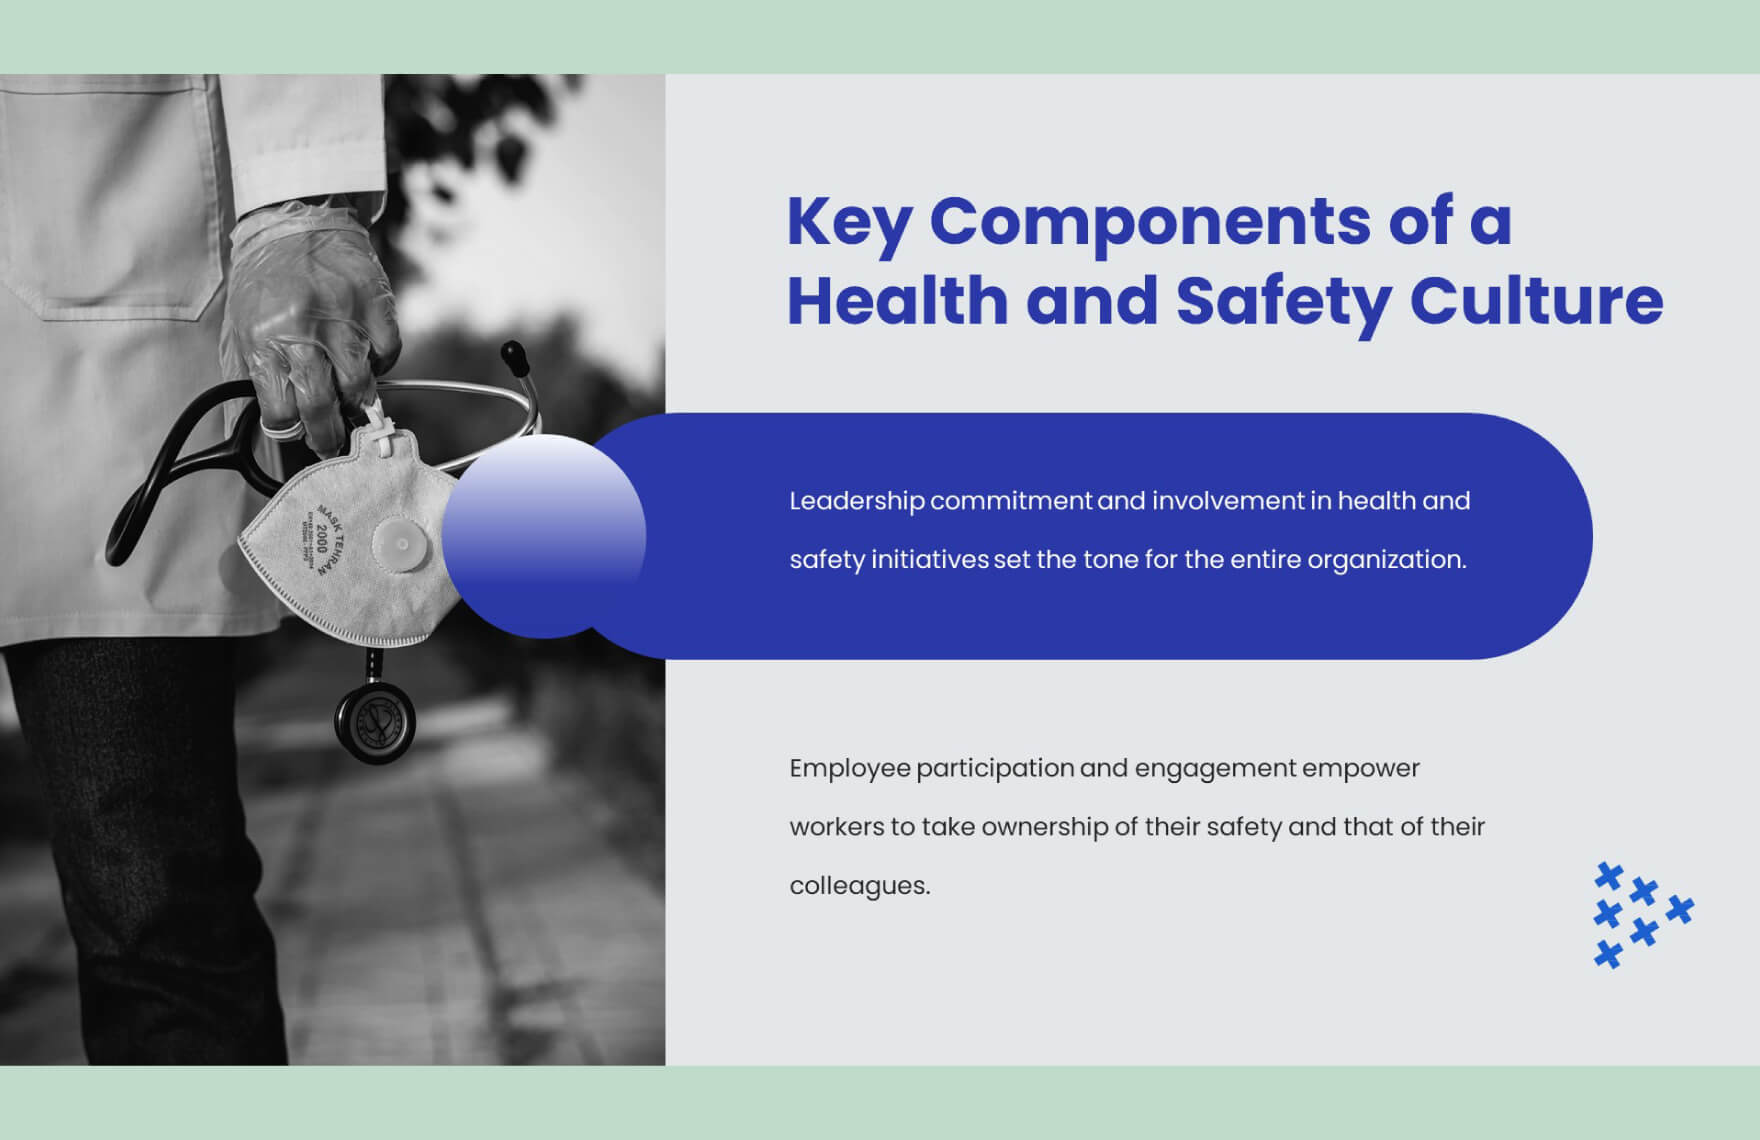 Health and Safety Culture PPT Template